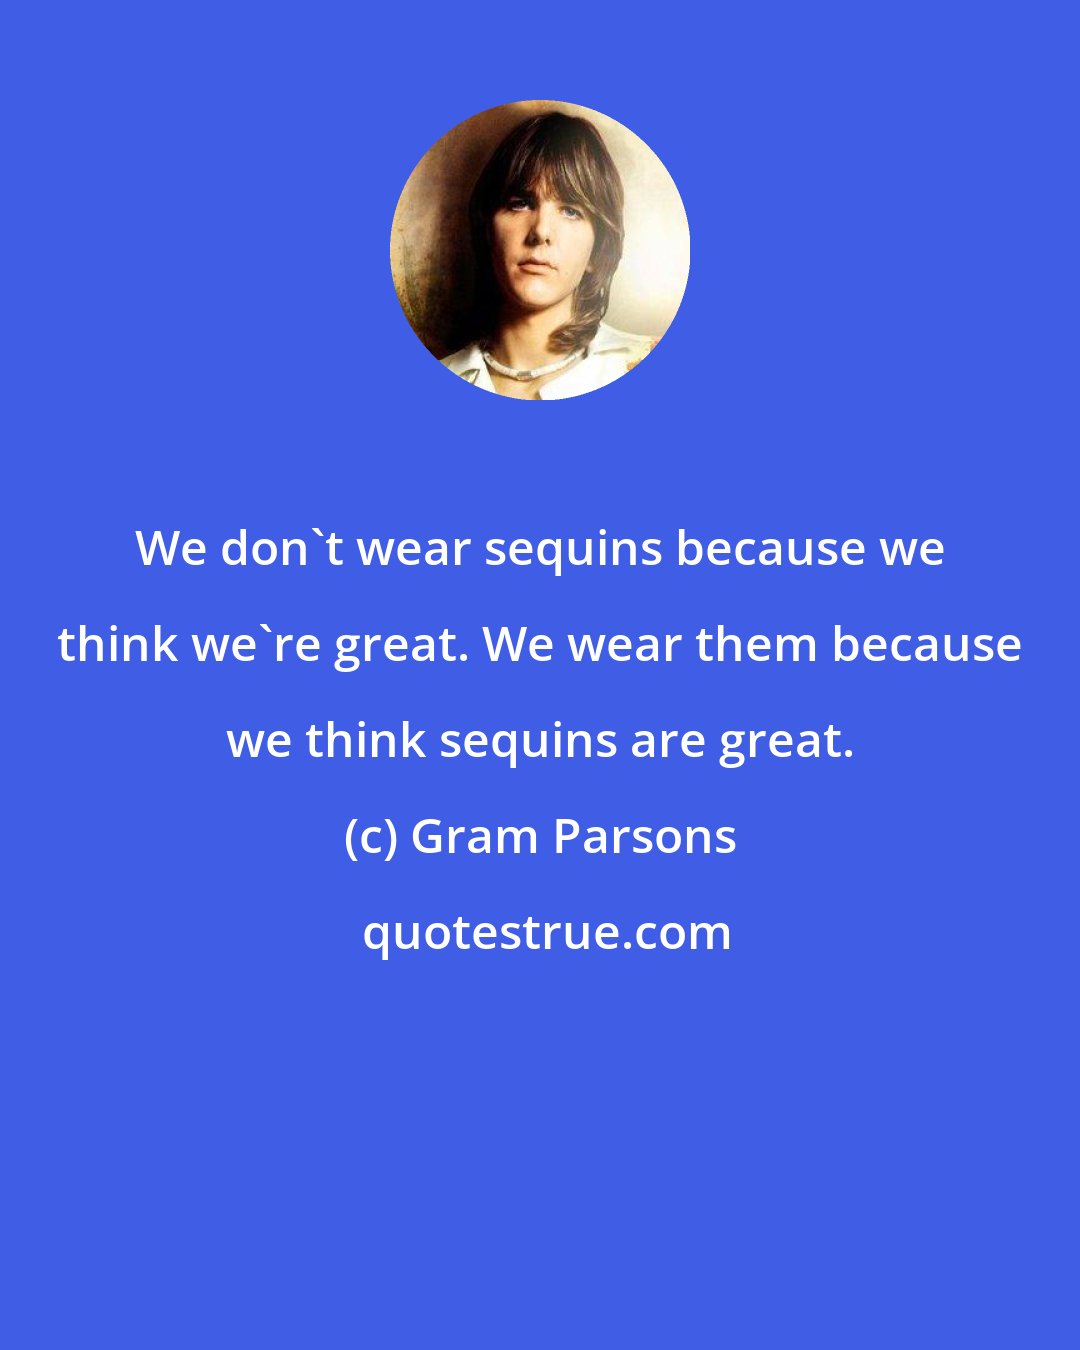 Gram Parsons: We don't wear sequins because we think we're great. We wear them because we think sequins are great.